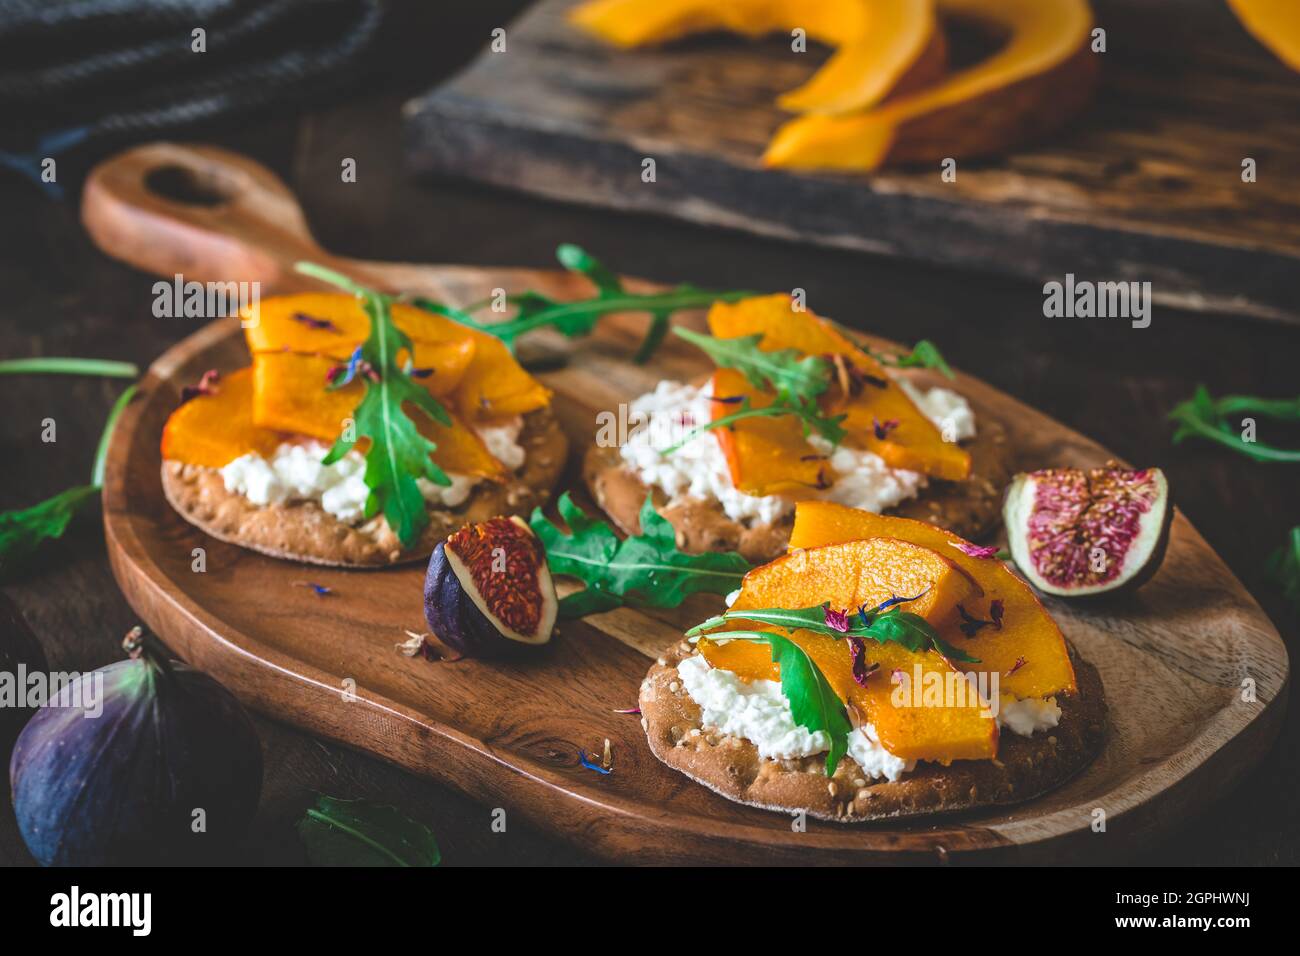 Round crispbread slices with grainy cream cheese, roasted pumpkin and rocket salad on wooden background Stock Photo